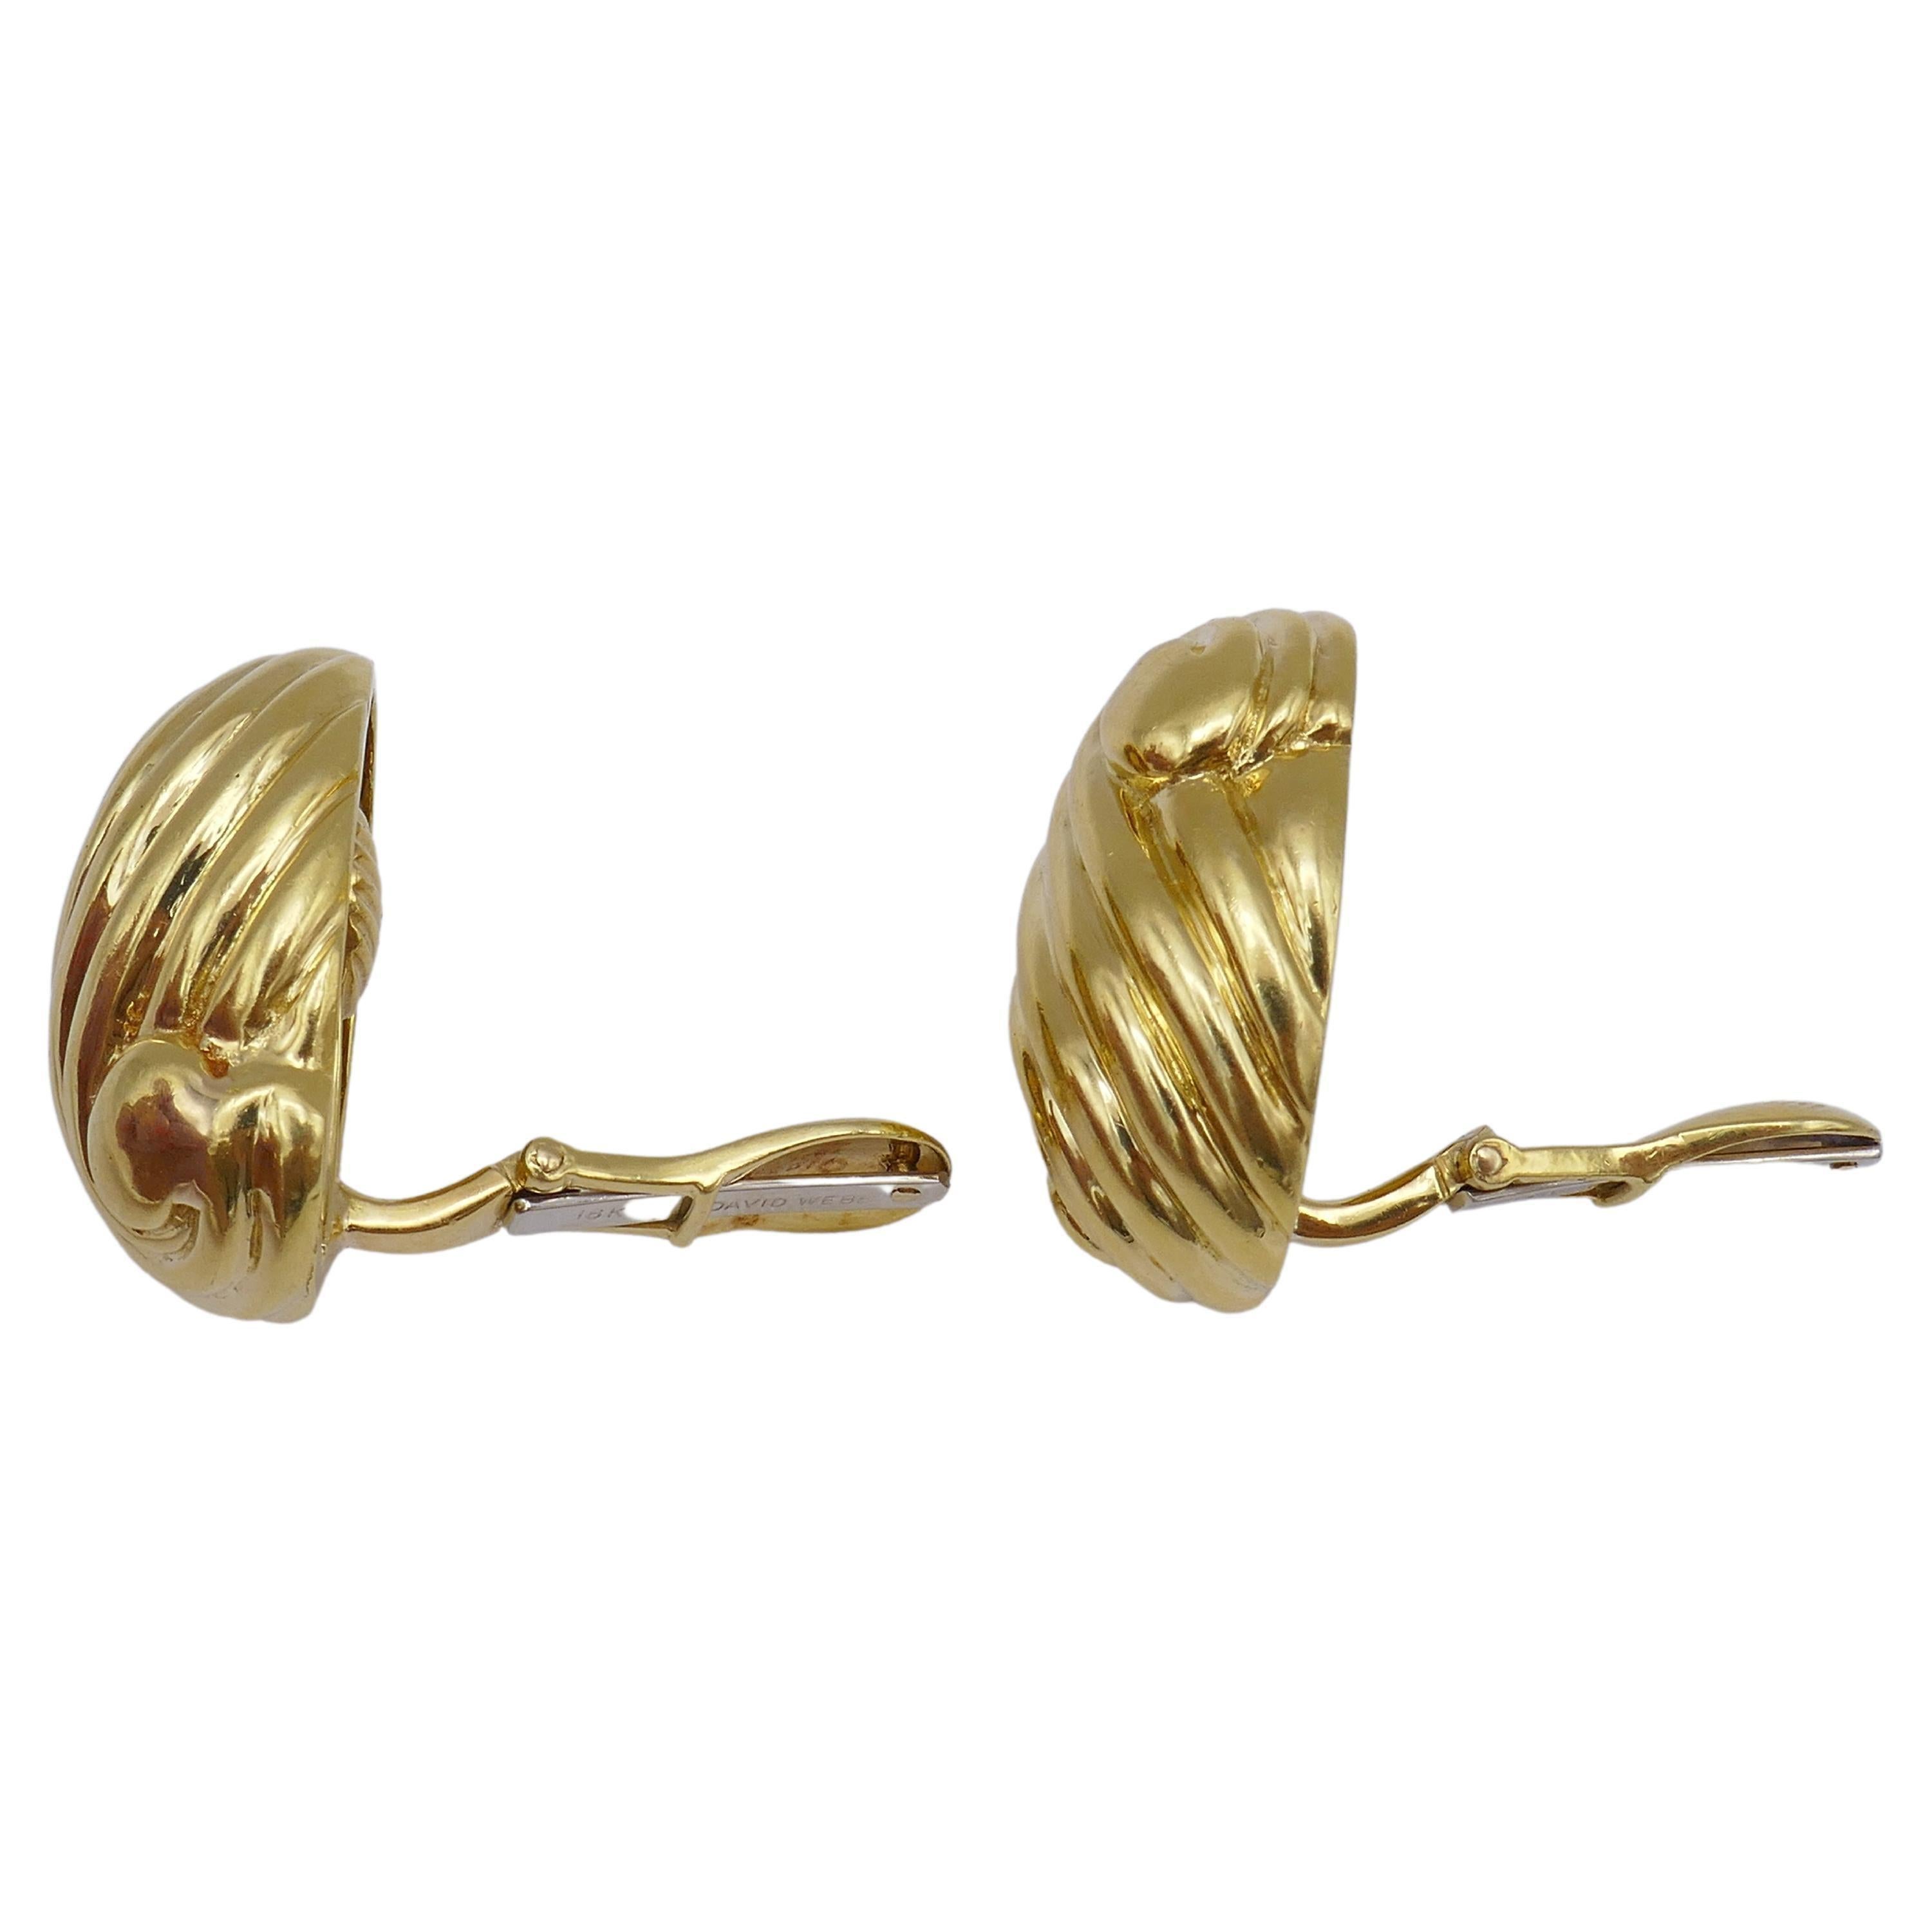 A pair of David Webb gold earrings with the swirl shell design. 
Classic 18k gold earrings for everyday wearing yet with the signature Webb's luxury touch.
It's a shiny pair of earrings that is as bold as it is elegant.
Clip-on earrings, post can be